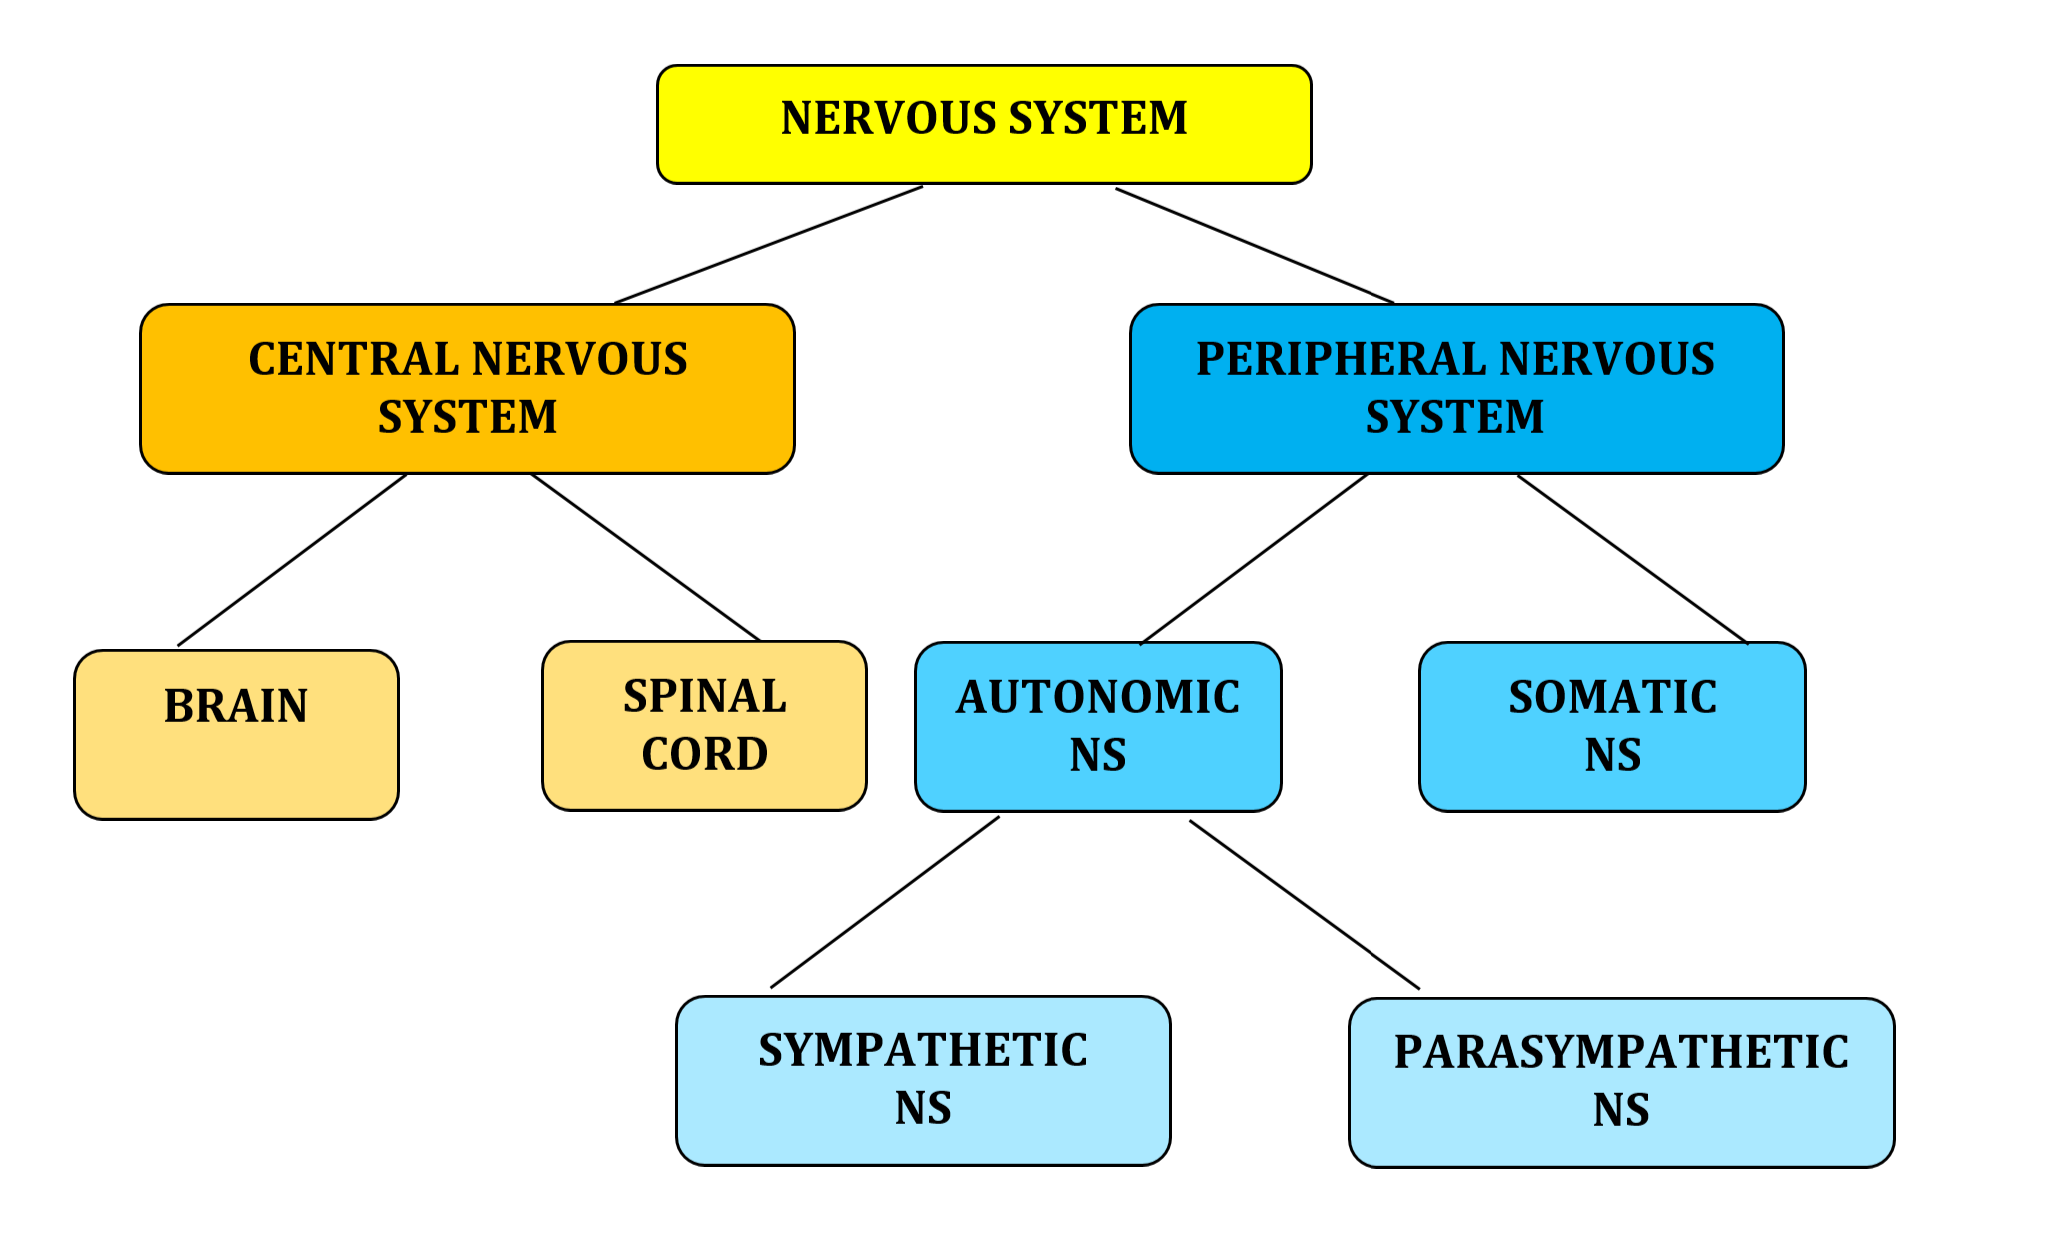 Diagram of the subdivisions of the nervous system as described in the text